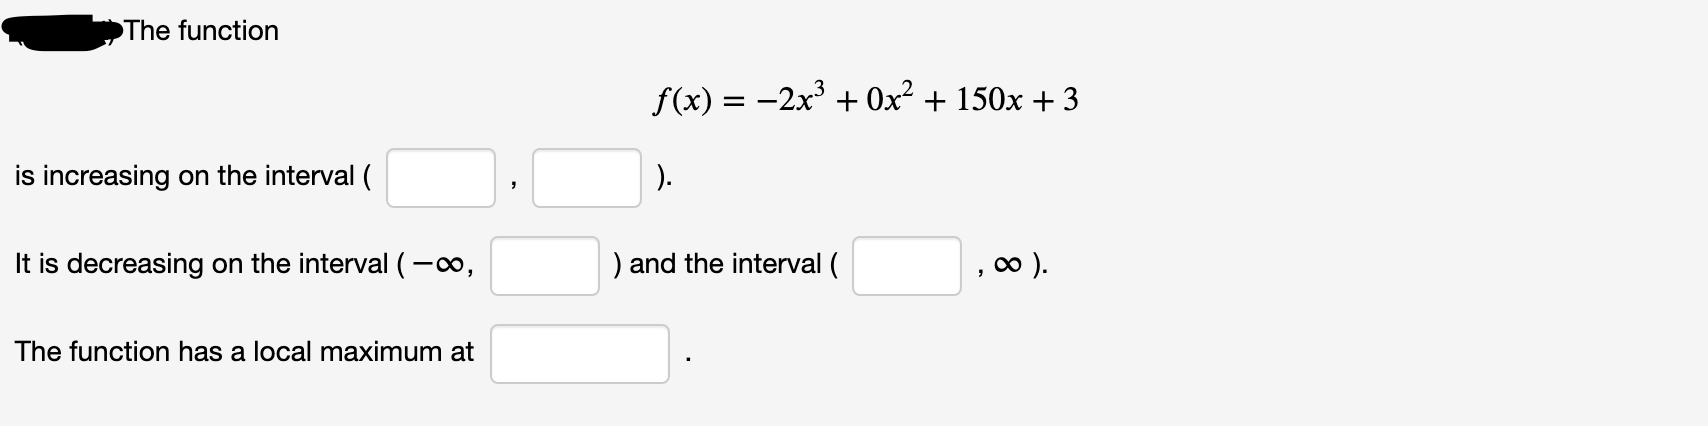 The function
f(x) = -2x + 0x² + 150x + 3
is increasing on the interval (
).
It is decreasing on the interval (-o,
) and the interval (
).
The function has a local maximum at
